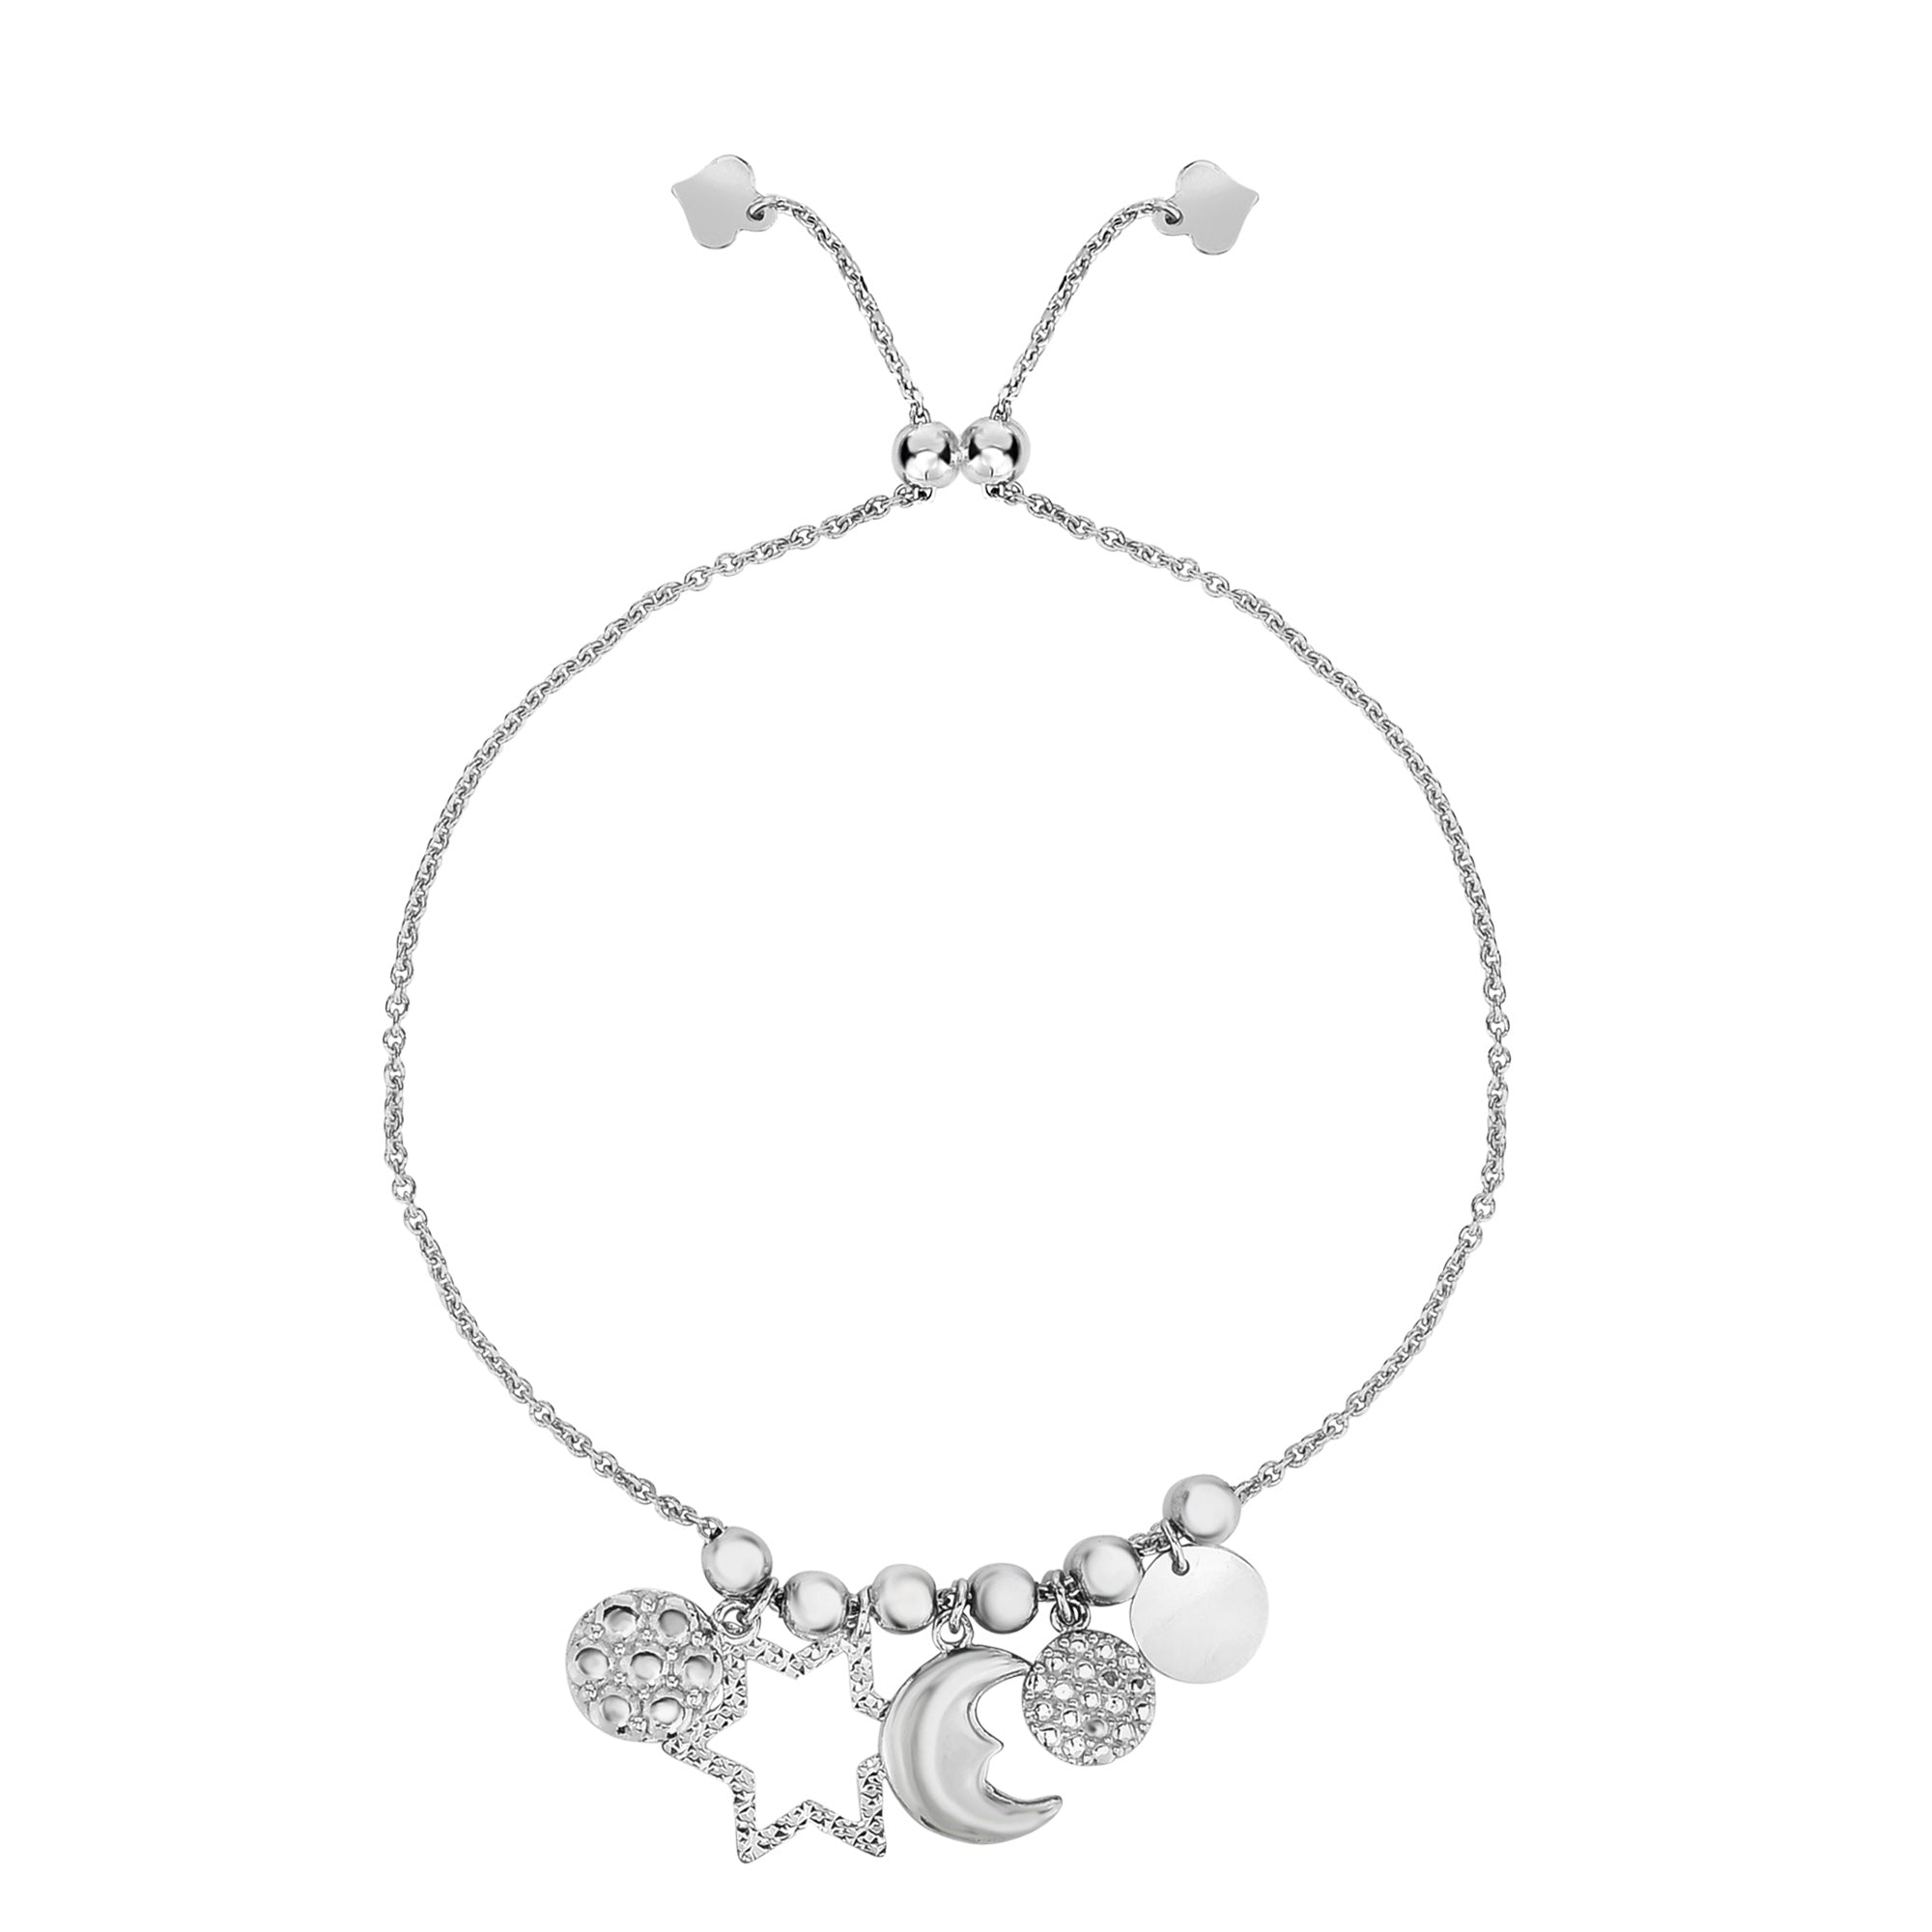 Sterling Silver Star Moon And Disc Charm Elements Adjustable Bolo Friendship Bracelet , 9.25"